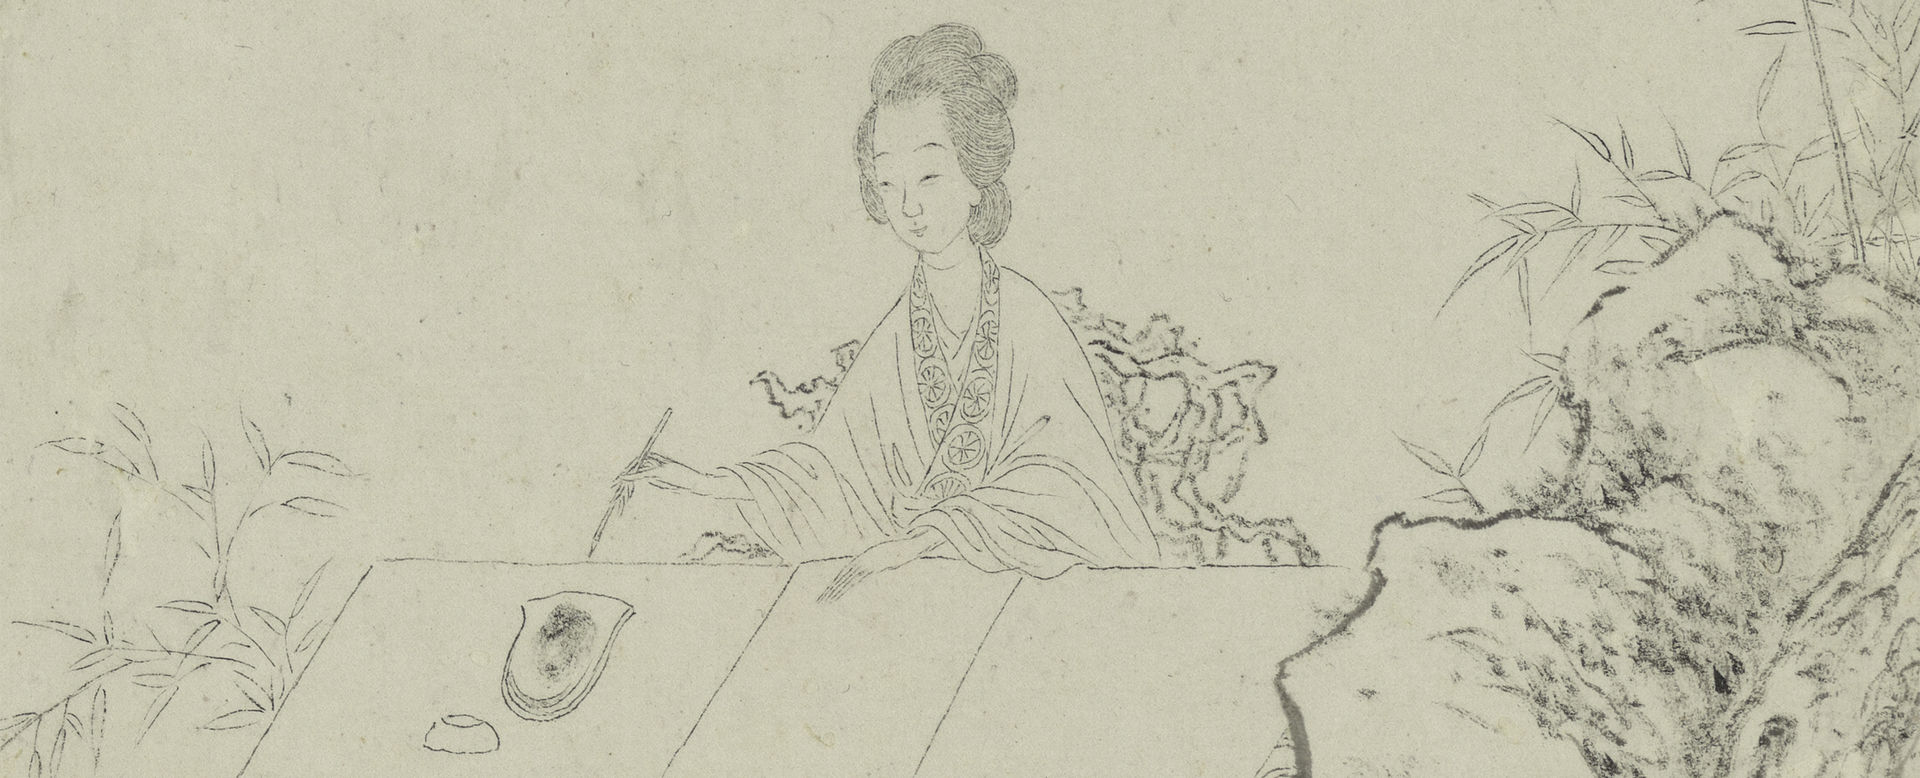 An ink painting of a woman sitting at a desk in a garden with a brush in one hand about to use the inkstone and blank paper in front of her